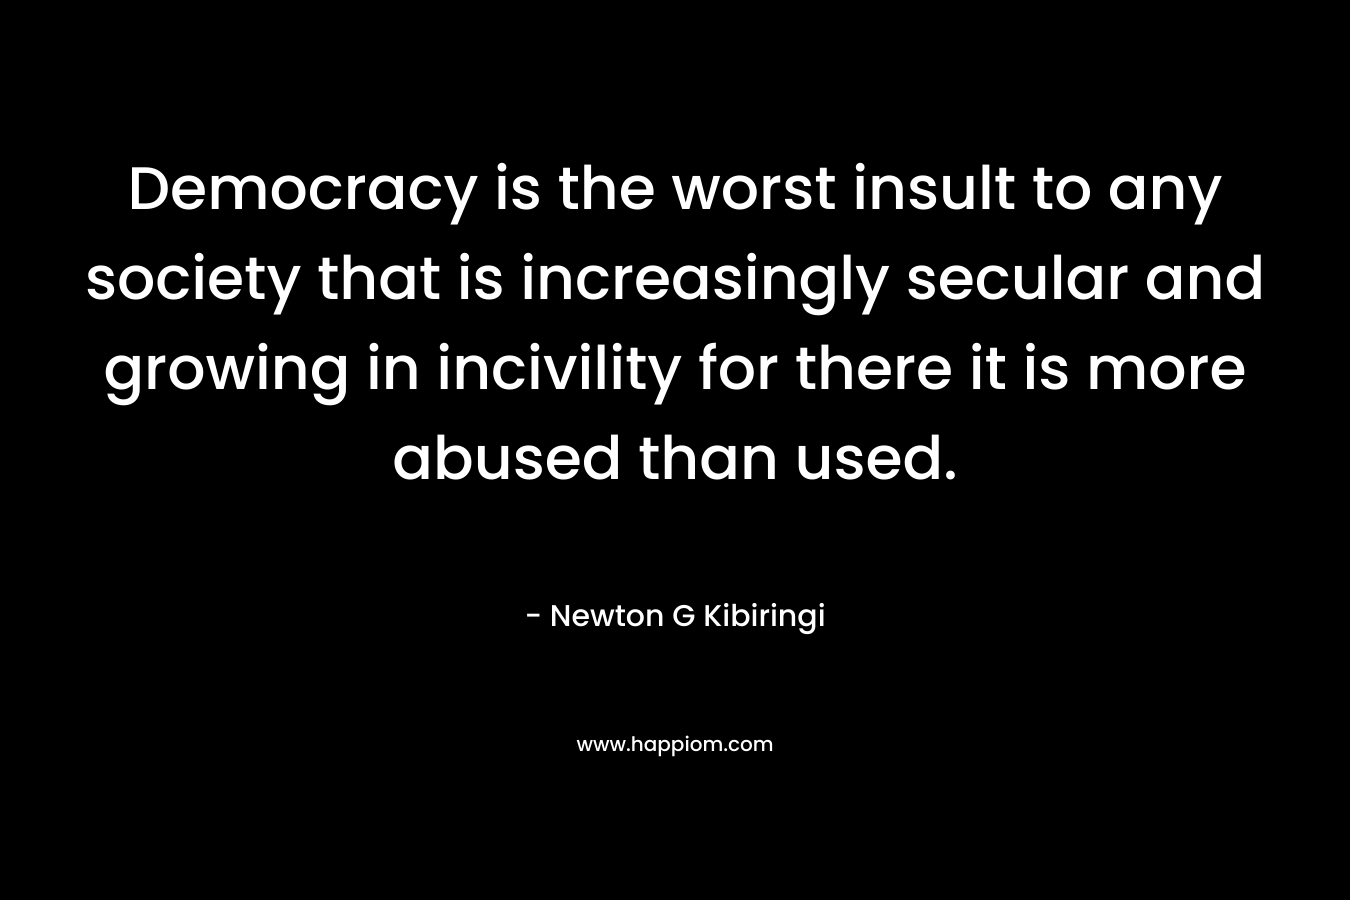 Democracy is the worst insult to any society that is increasingly secular and growing in incivility for there it is more abused than used. – Newton G Kibiringi